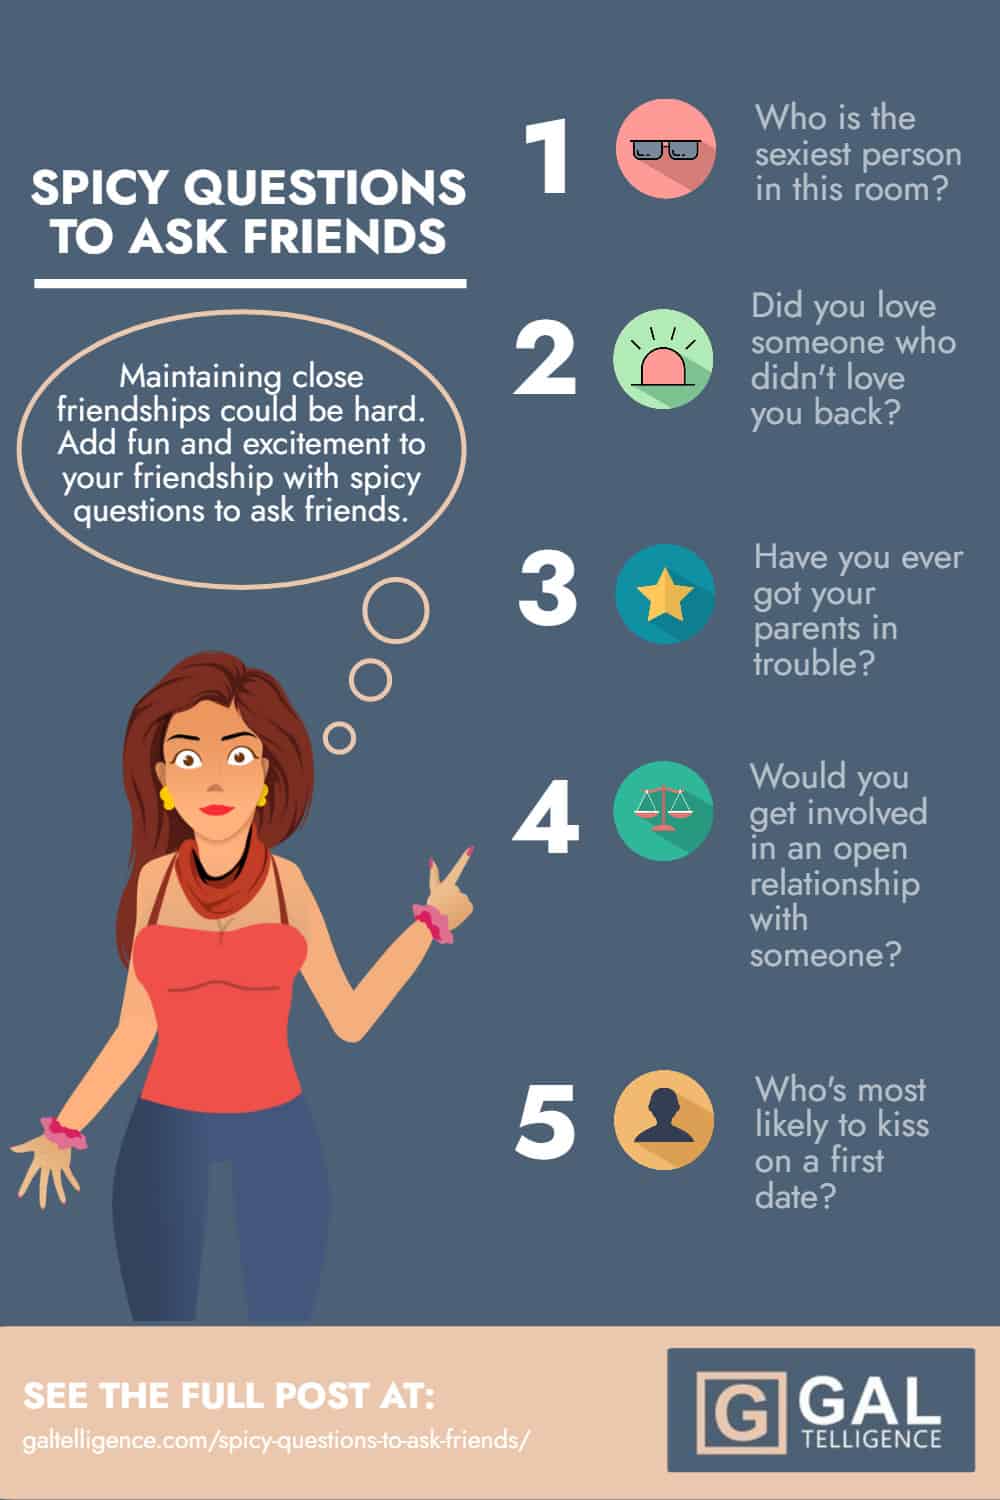 spicy questions to ask friends - Infographic